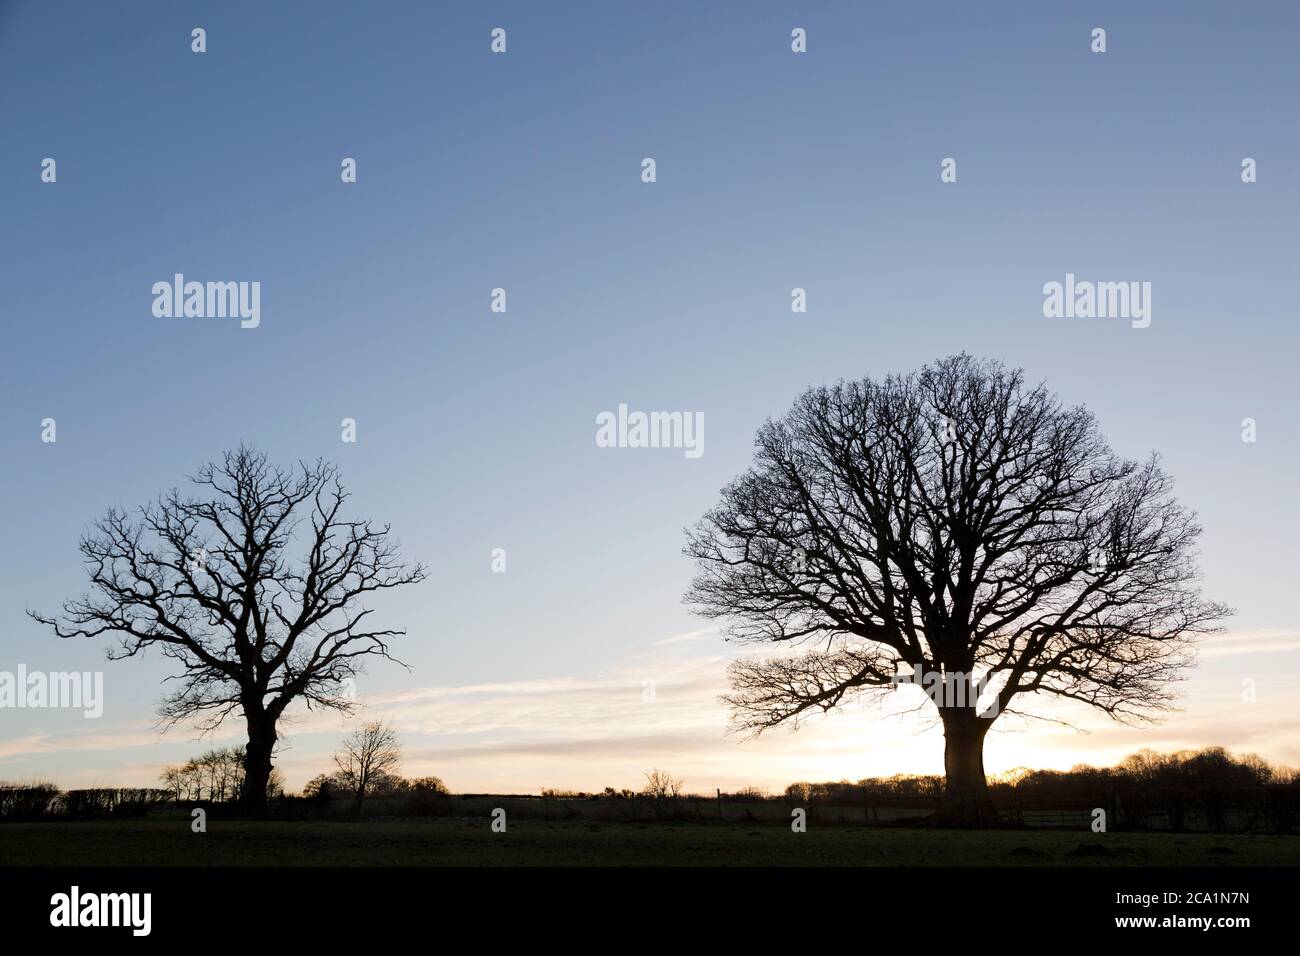 Leafless trees in silhouette against a winter sky in Shropshire, England. Stock Photo